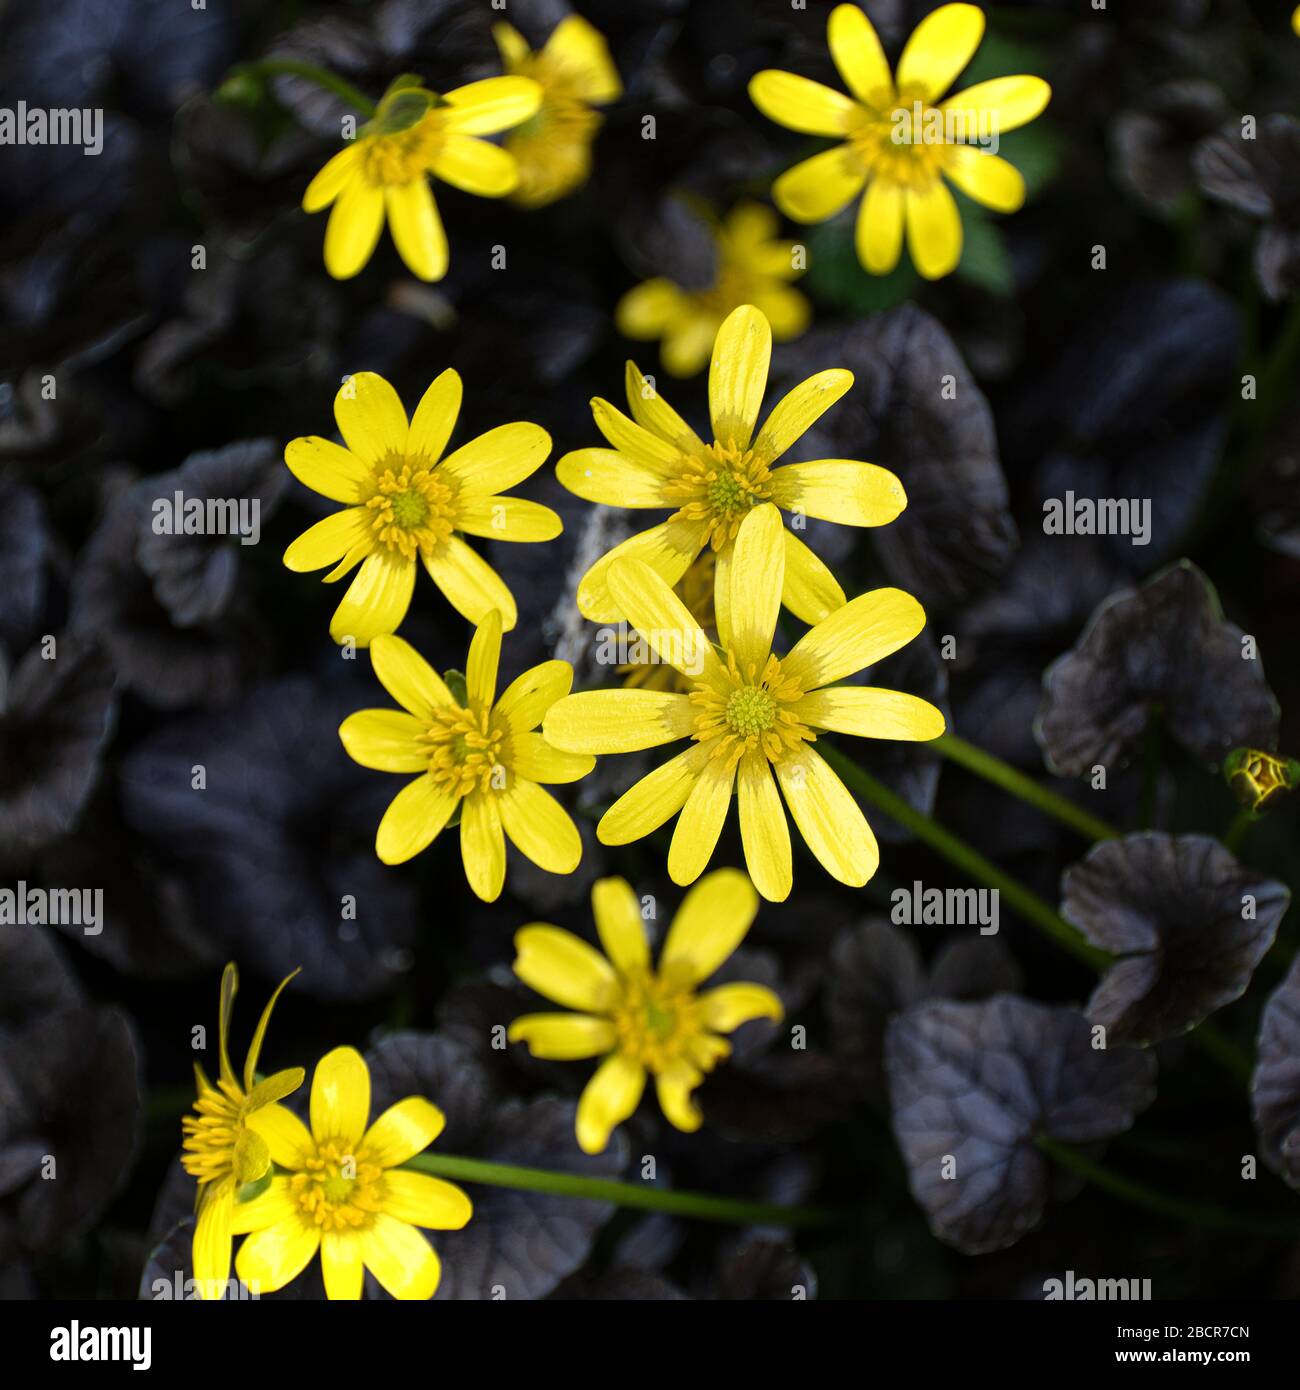 Clump of Bright Yellow Flowers Lesser Celandine Brazen Hussy in an Alsager Cheshire Garden England United Kingdom UK Stock Photo